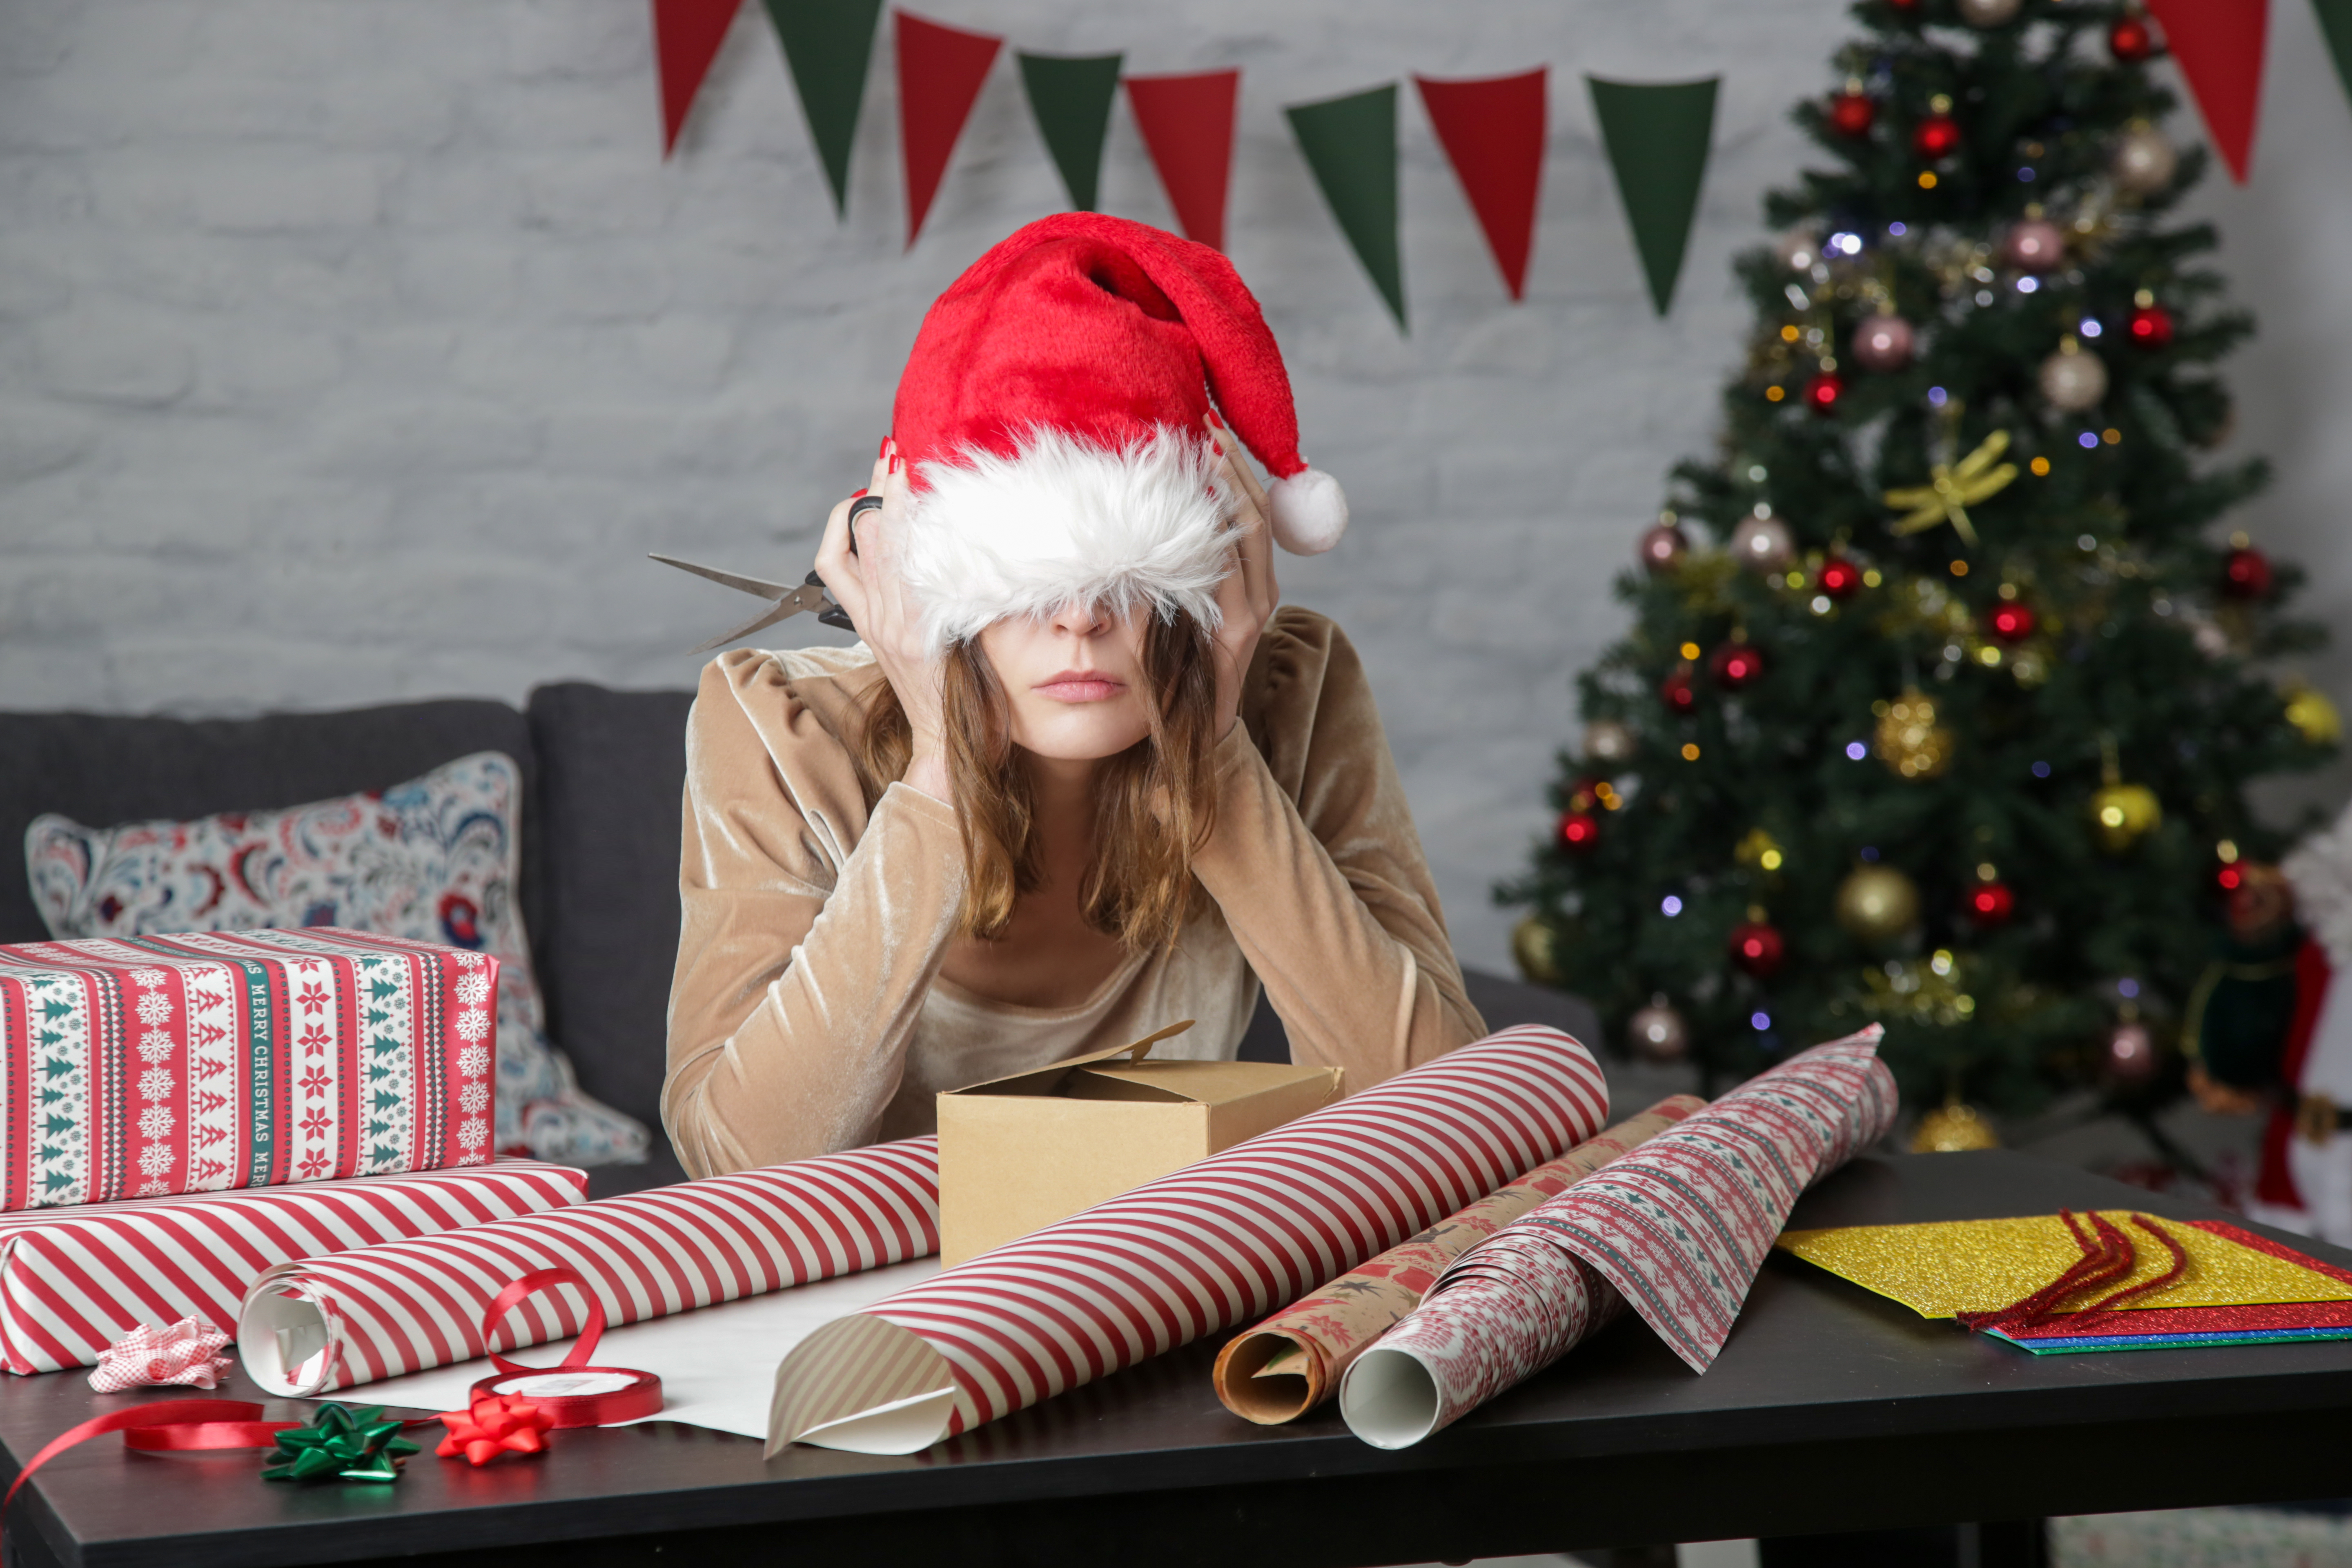 Gift wrapping supplies surrounding stressed woman in Santa hat